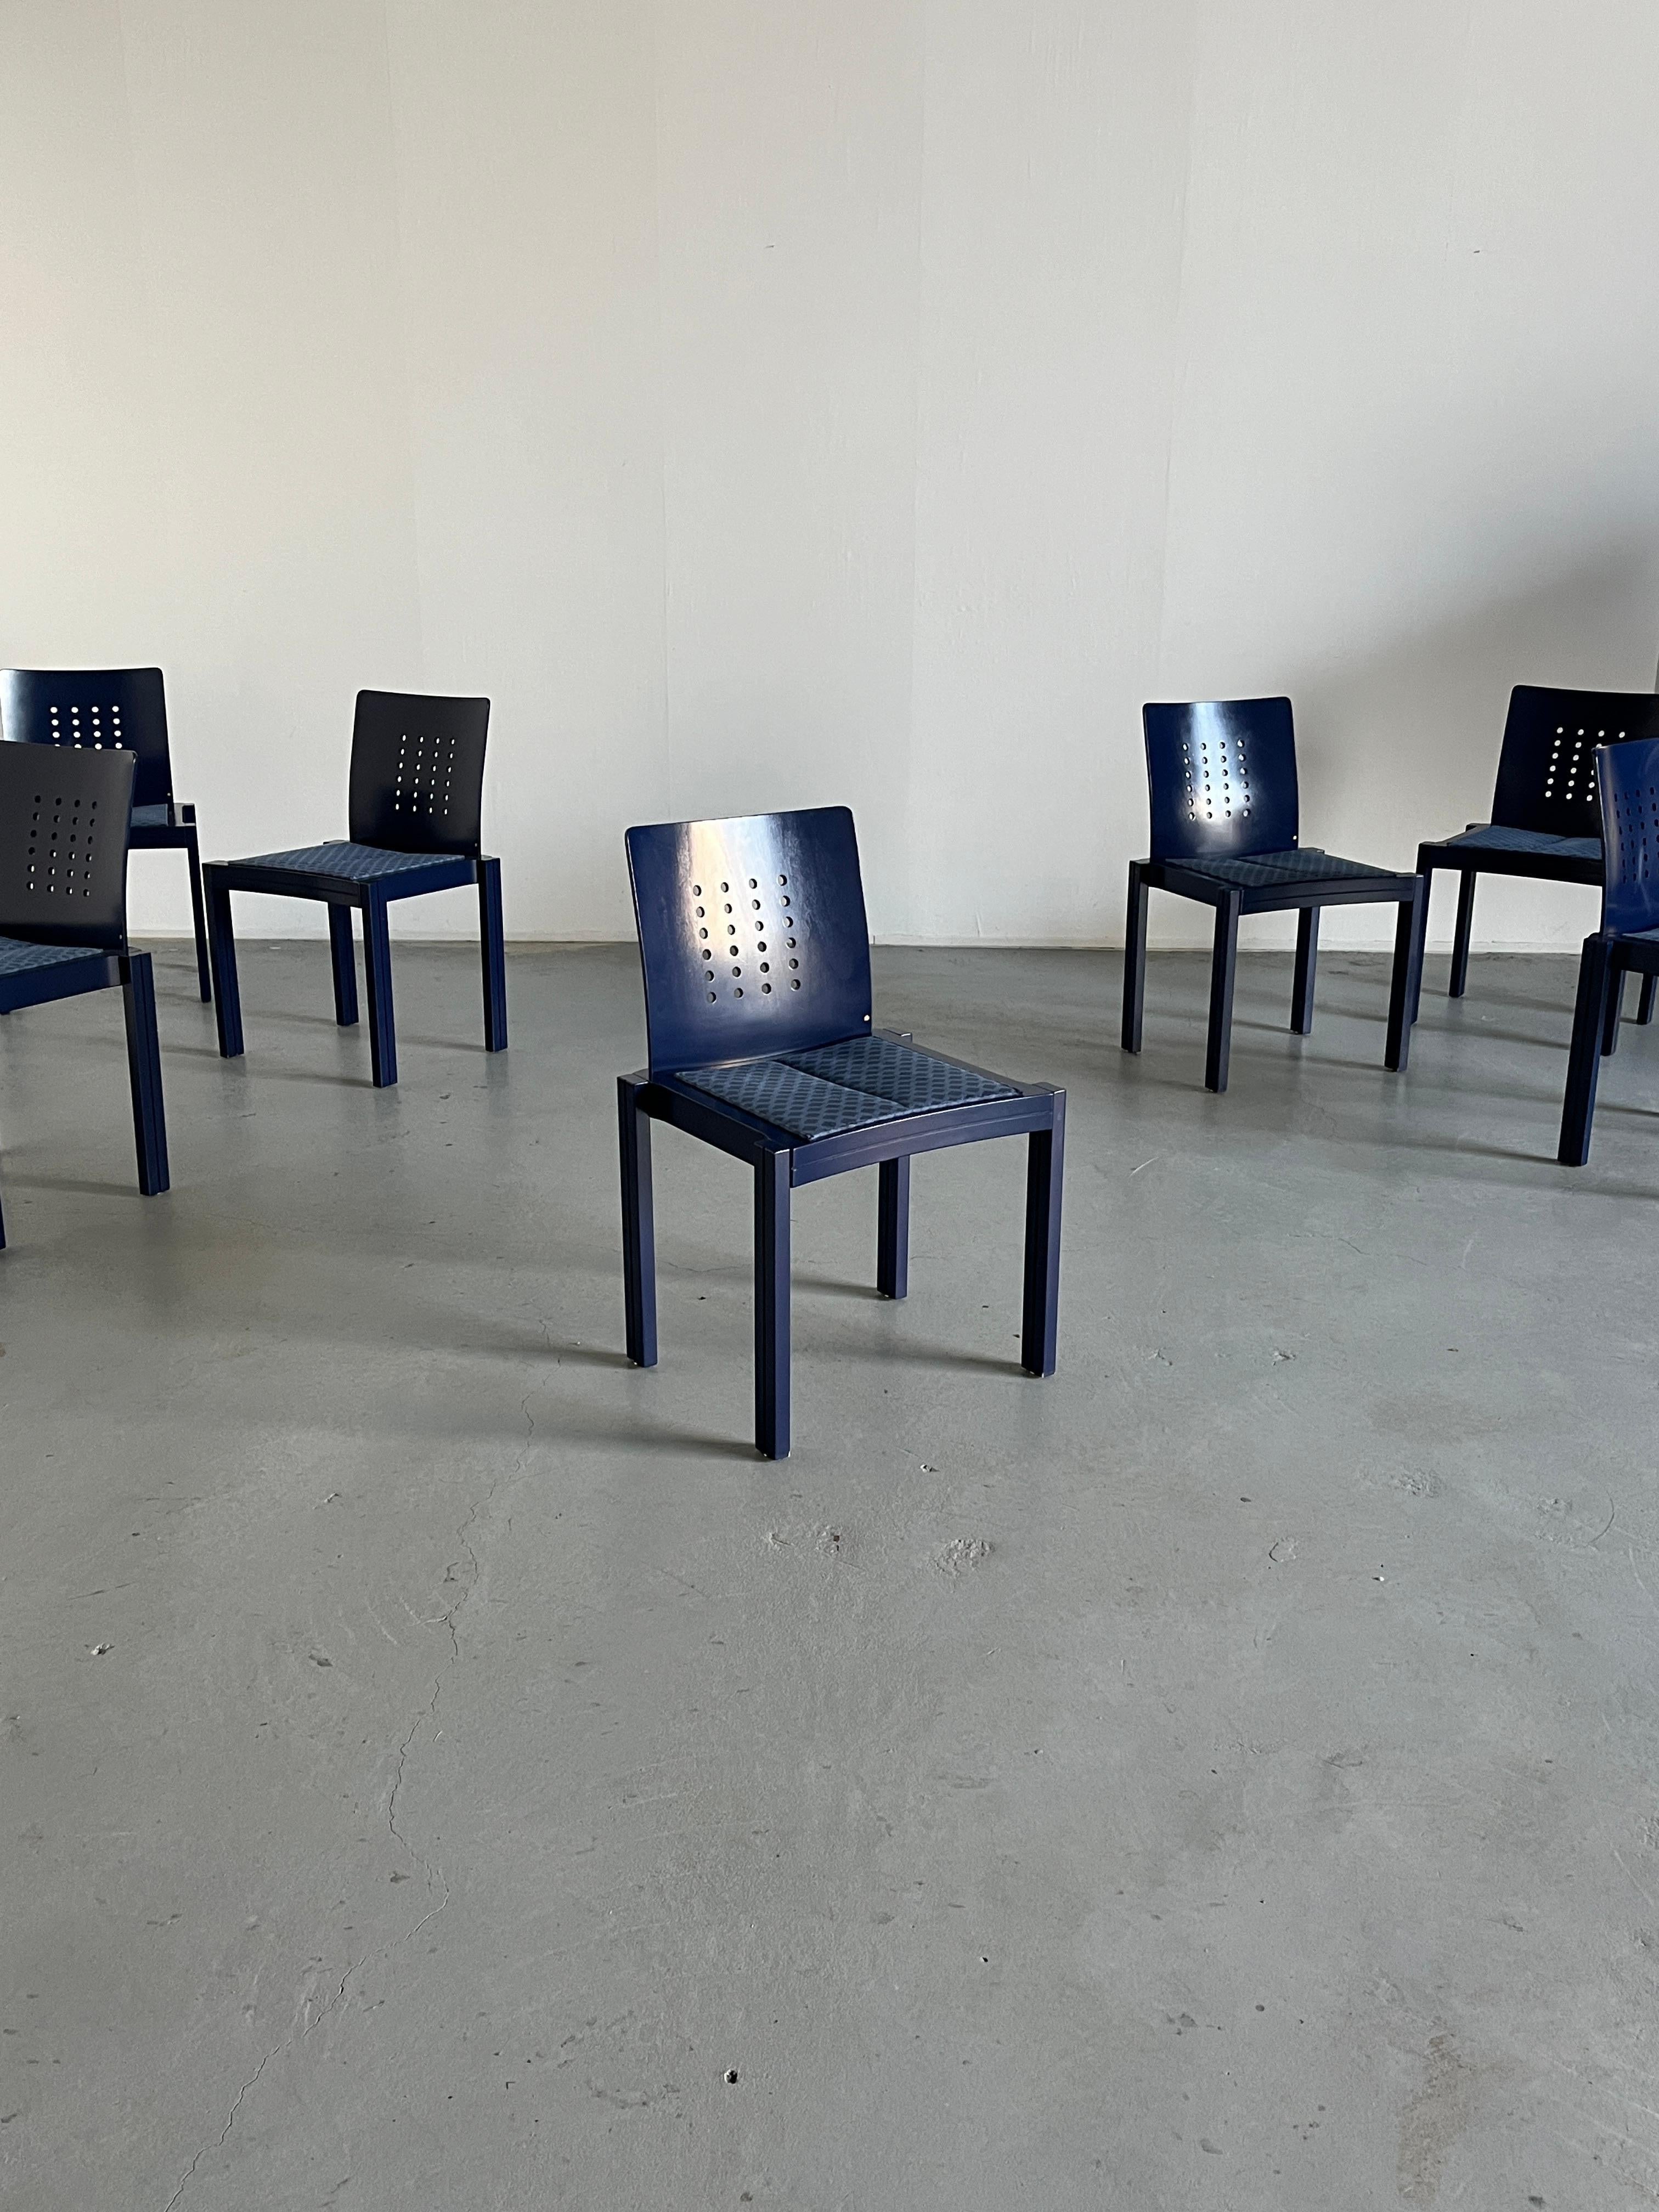 Exceptionally rare and collectible, postmodern Memphis design original Thonet dining chairs. 
Sculptural and geometrically shaped.

Sold per piece.
Twenty pieces available.

Produced by Thonet Vienna in 1996.
Quality made and in very good vintage